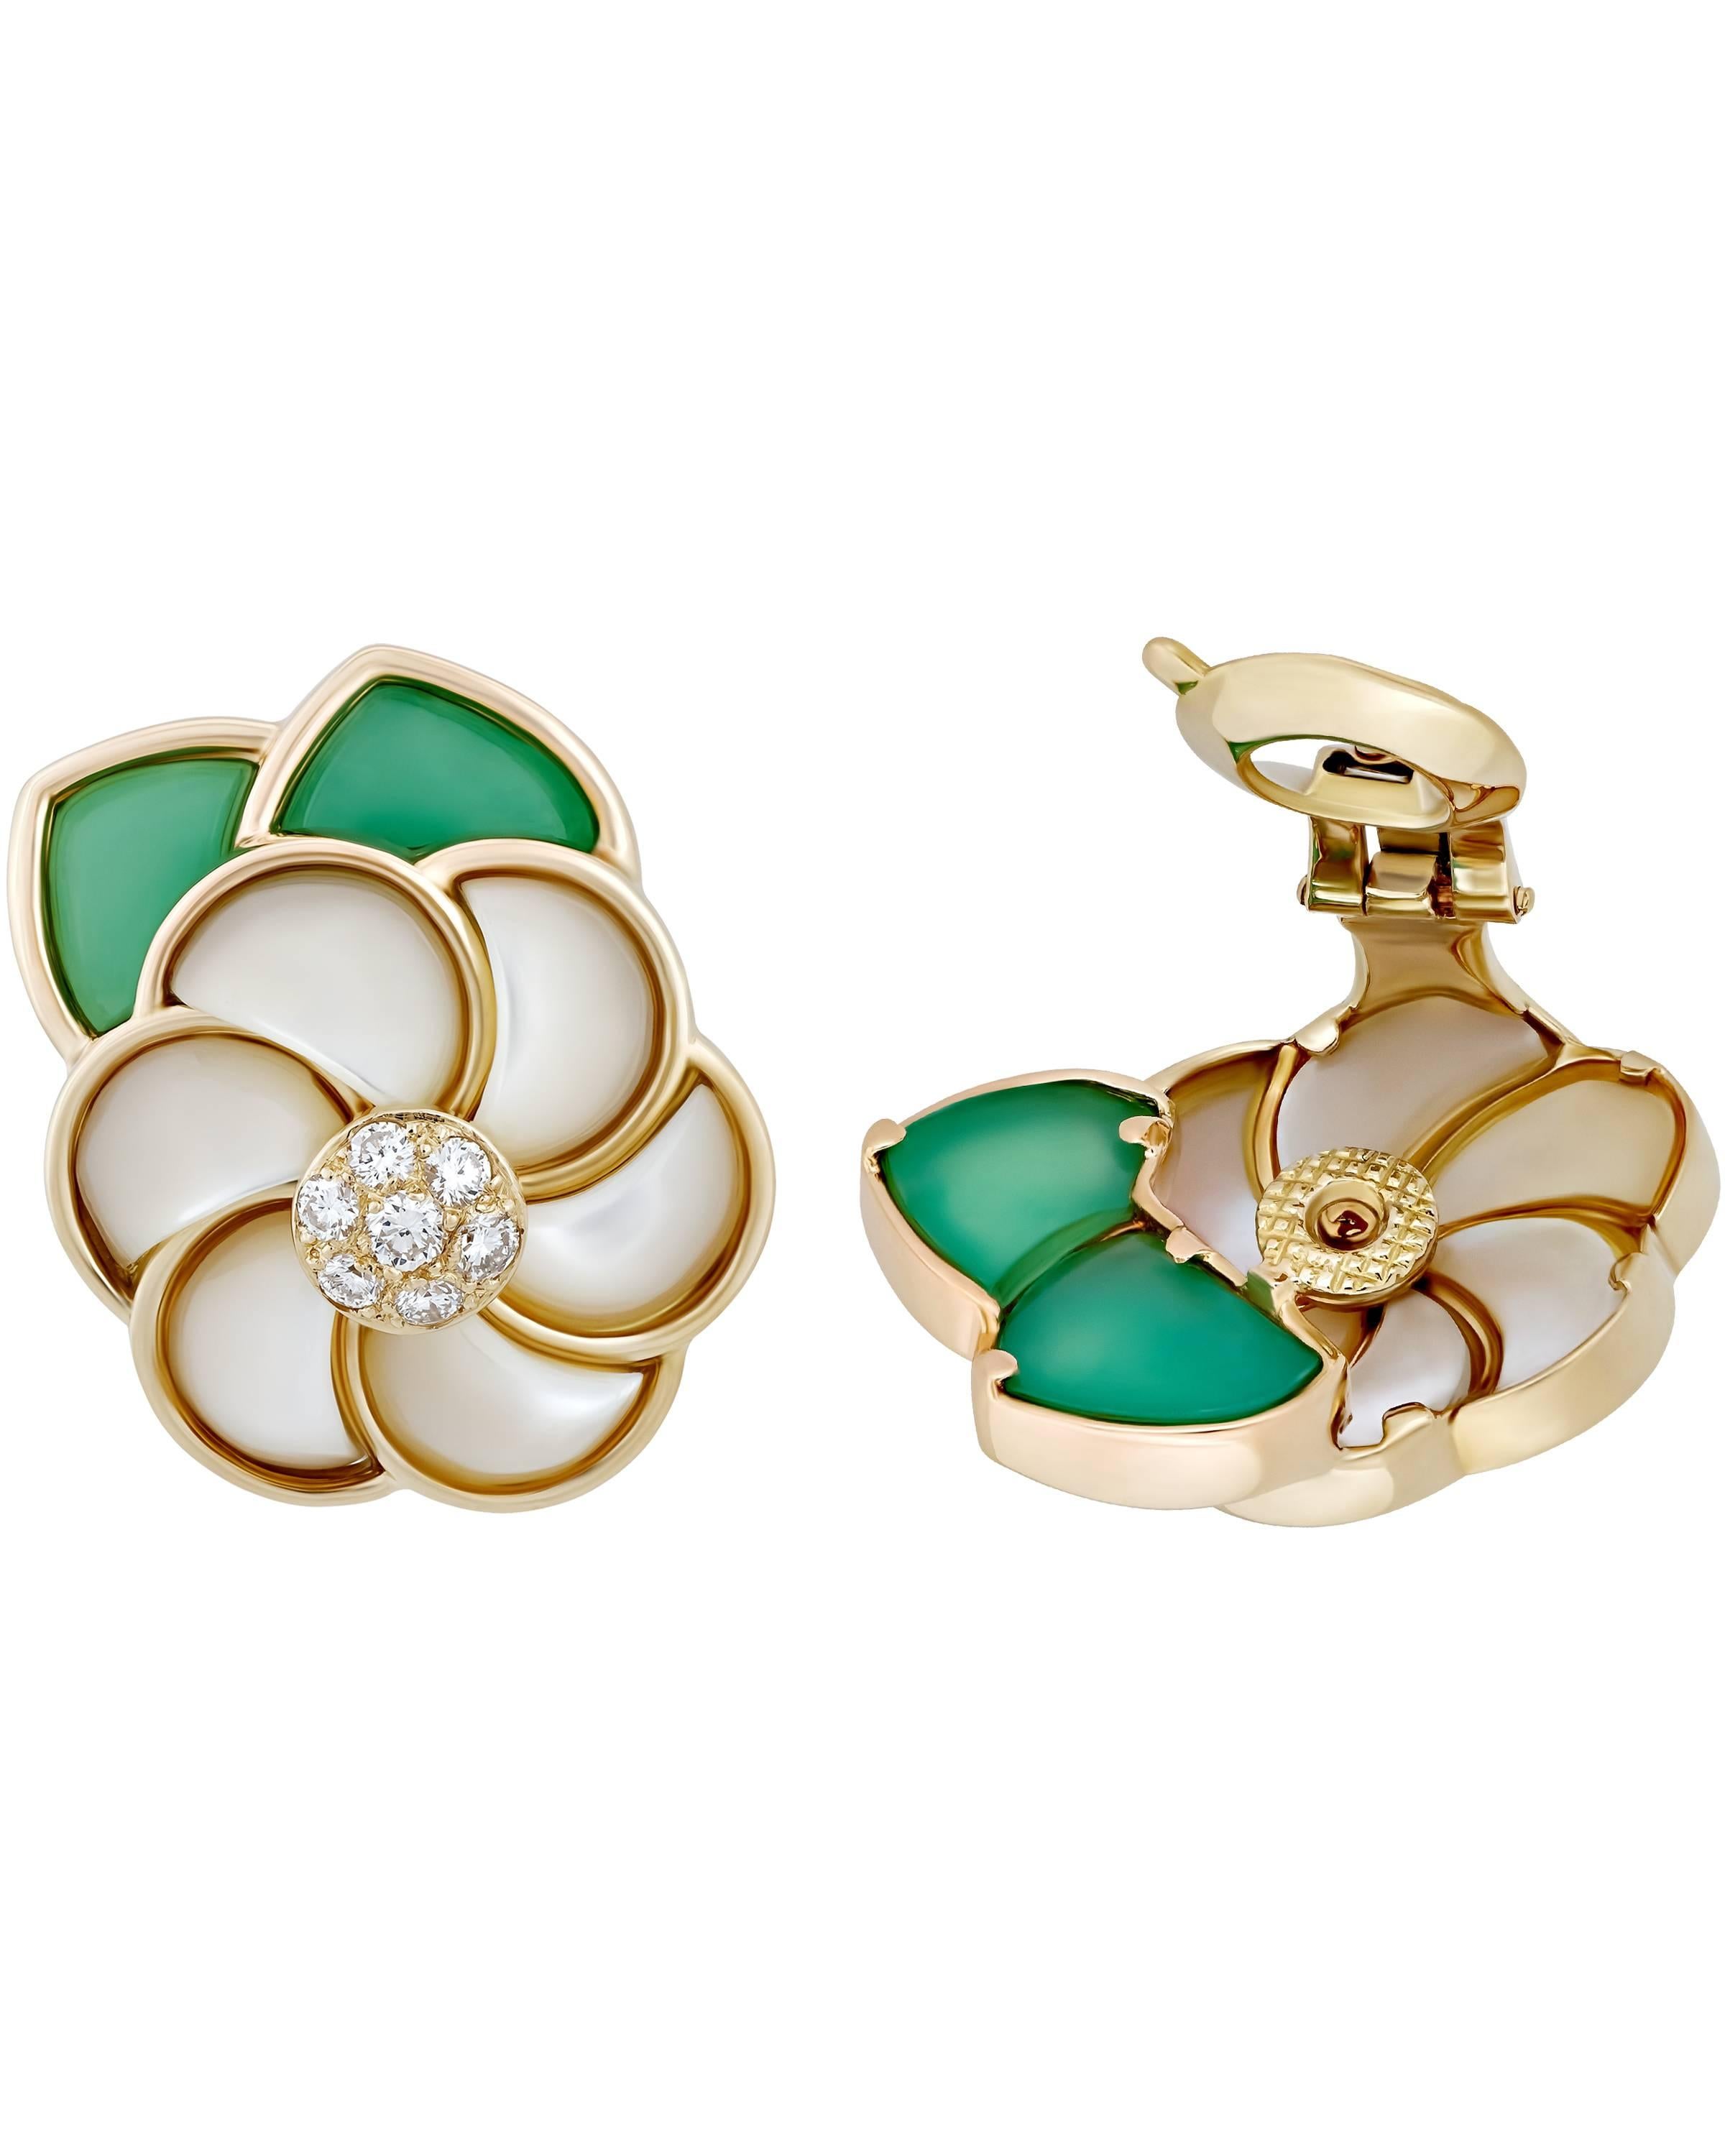 Only Van Cleef & Arpels can make two floral earrings look like such a profound artistic achievement. Each earring features 7 pave prong set diamonds and a clip backing.

METAL TYPE: 18K Yellow Gold
STONE WEIGHT: 0.75ct twd
TOTAL WEIGHT: 20.4g

This